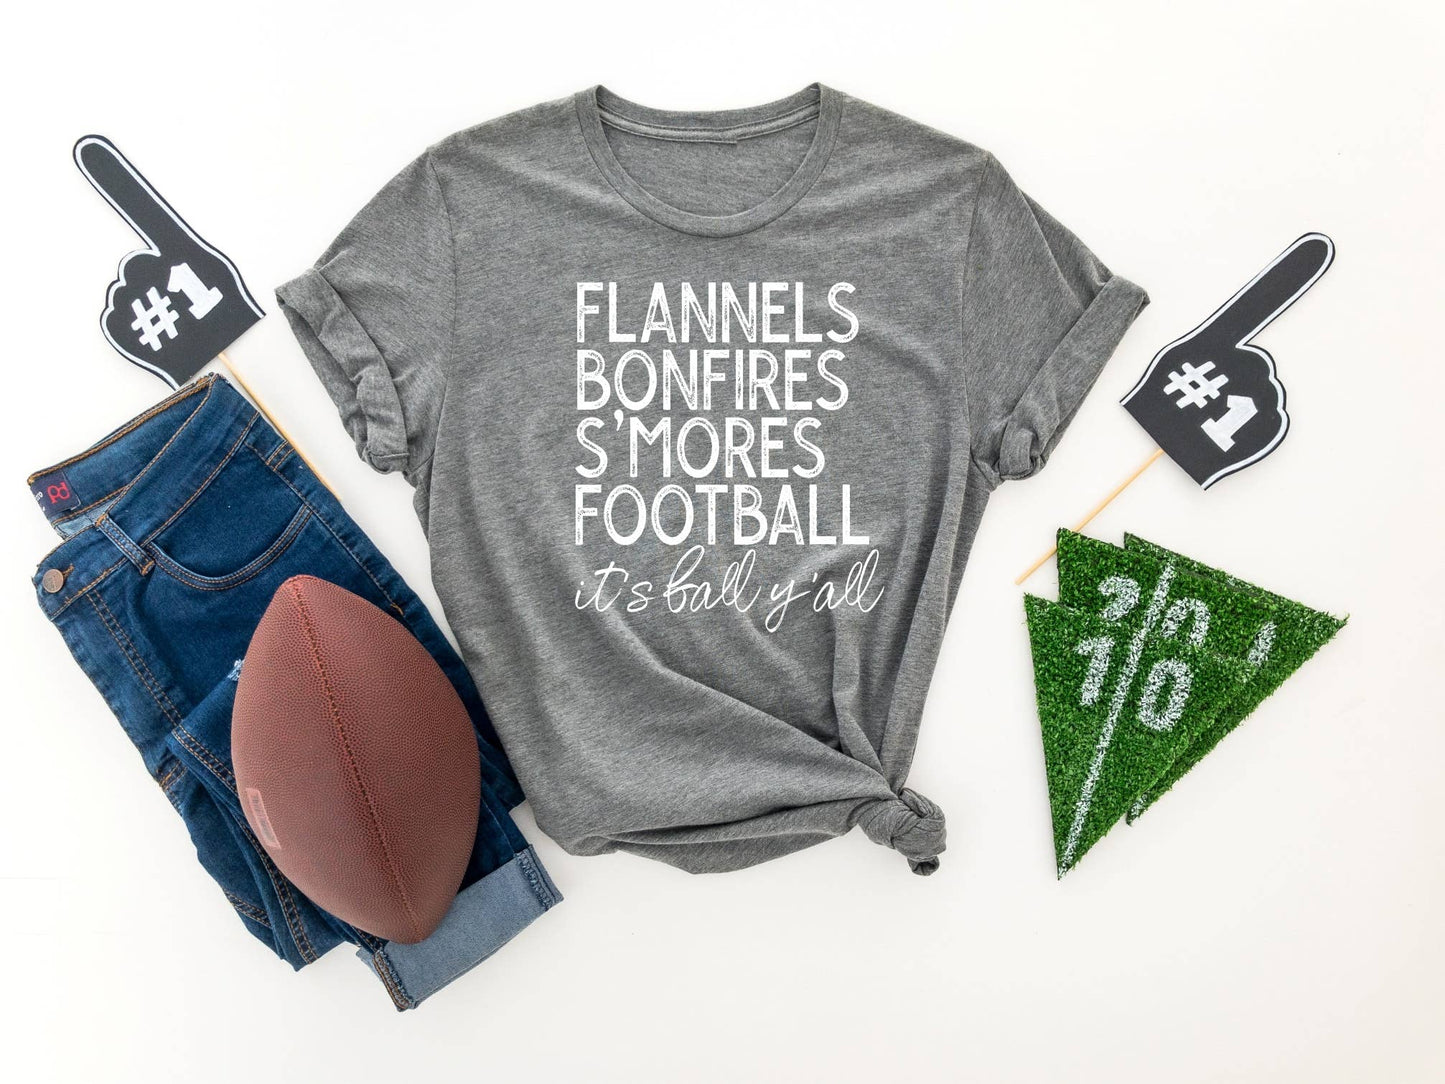 FLANNELS BONFIRES SMOORES FOOTBALL GRAPHIC TEE FREE SHIPING